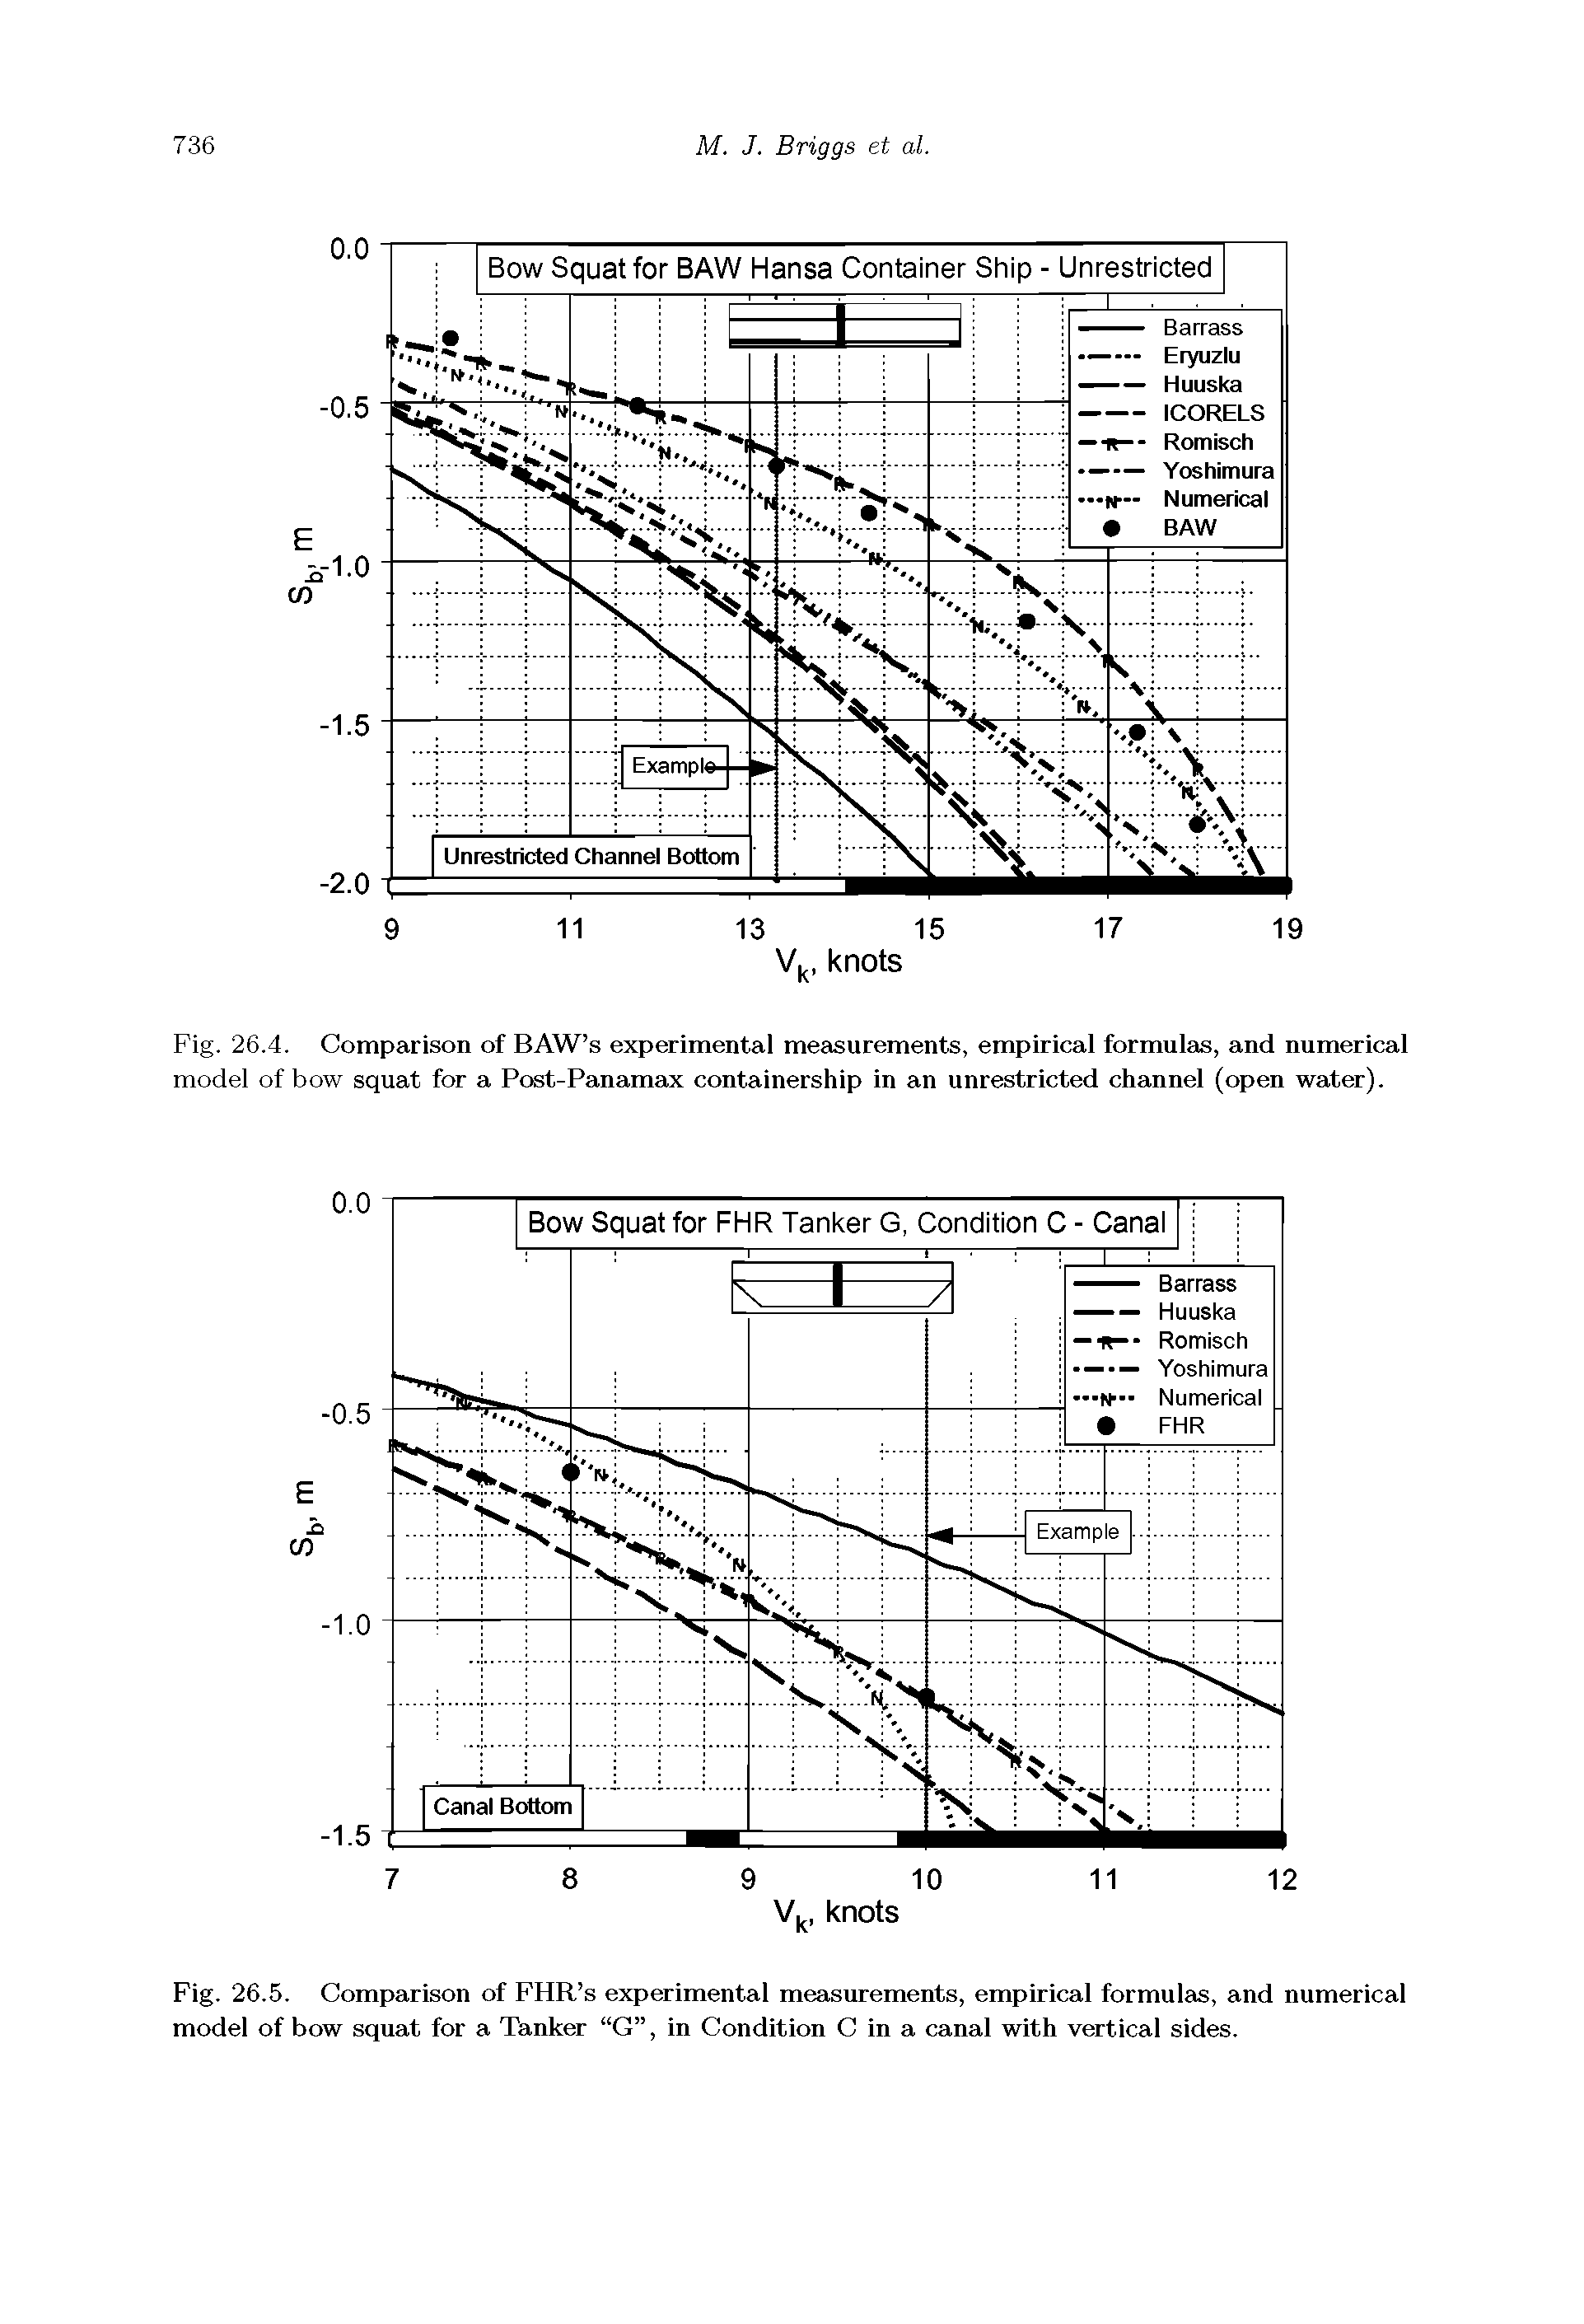 Fig. 26.4. Comparison of BAW s experimental measurements, empirical formulas, and numerical model of bow squat for a Post-Panamax containership in an unrestricted channel (open water).